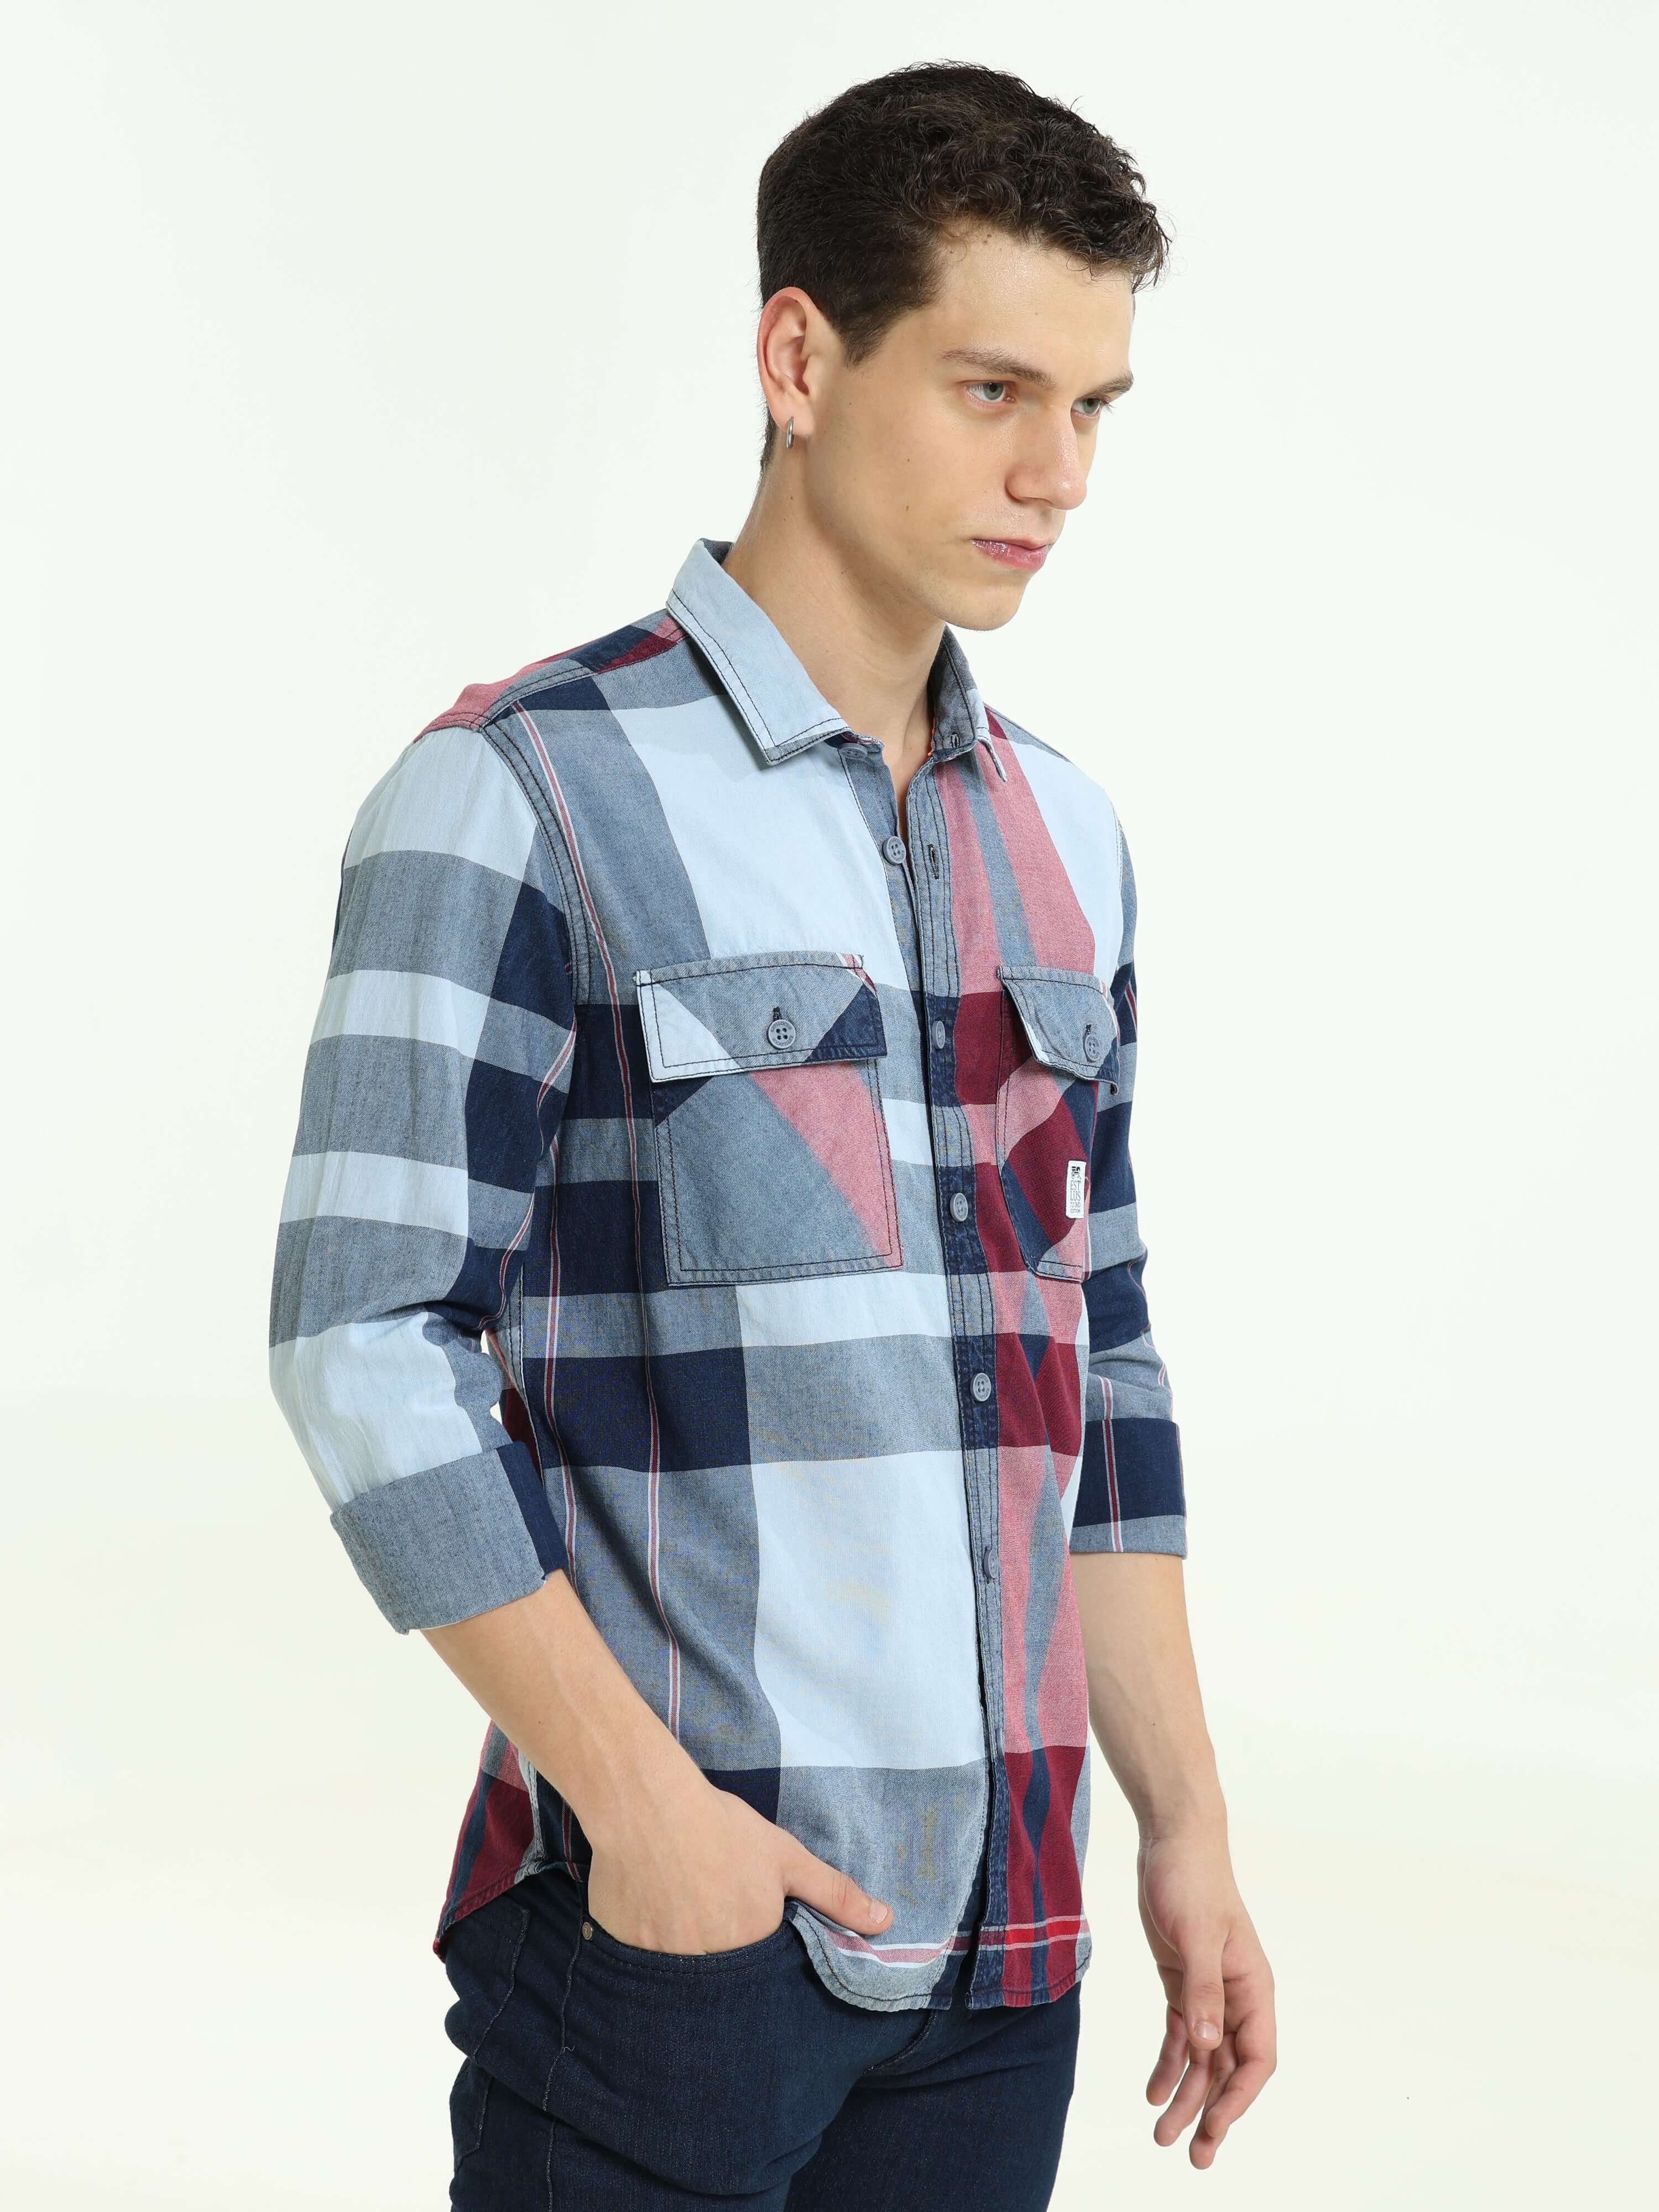 Indigo big check double pocket shirt shop online at Estilocus. 100% Cotton • Full-sleeve check shirt• Cut and sew placket• Regular collar• Double button edge cuff • Double pocket with flap • Curved bottom hemline . • All double needle construction, finest